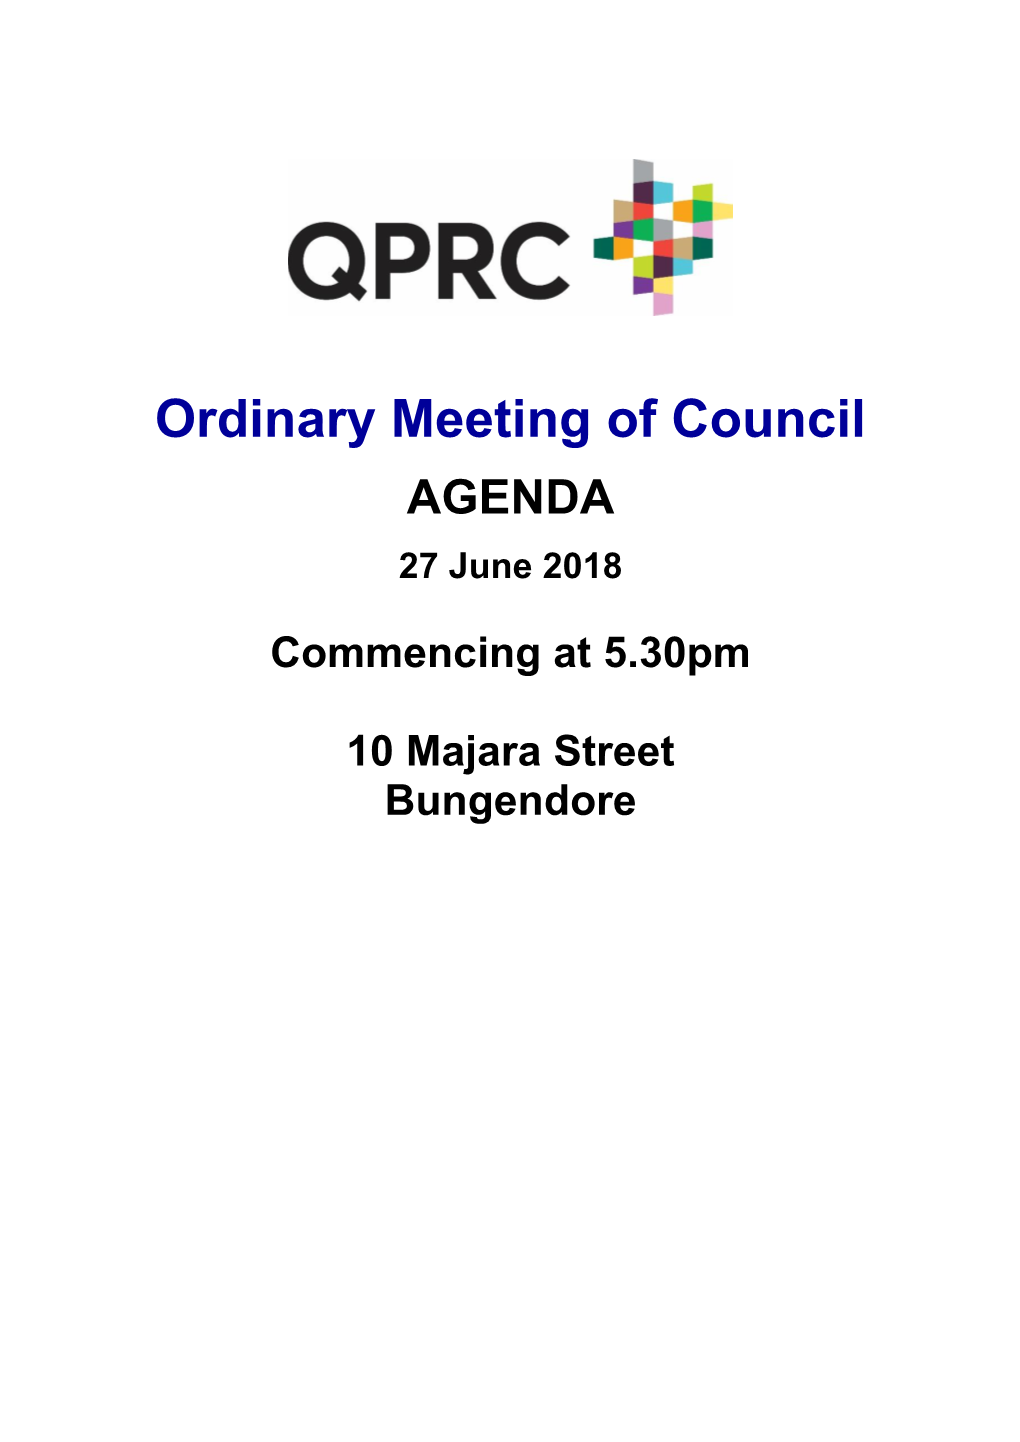 Agenda of Ordinary Meeting of Council